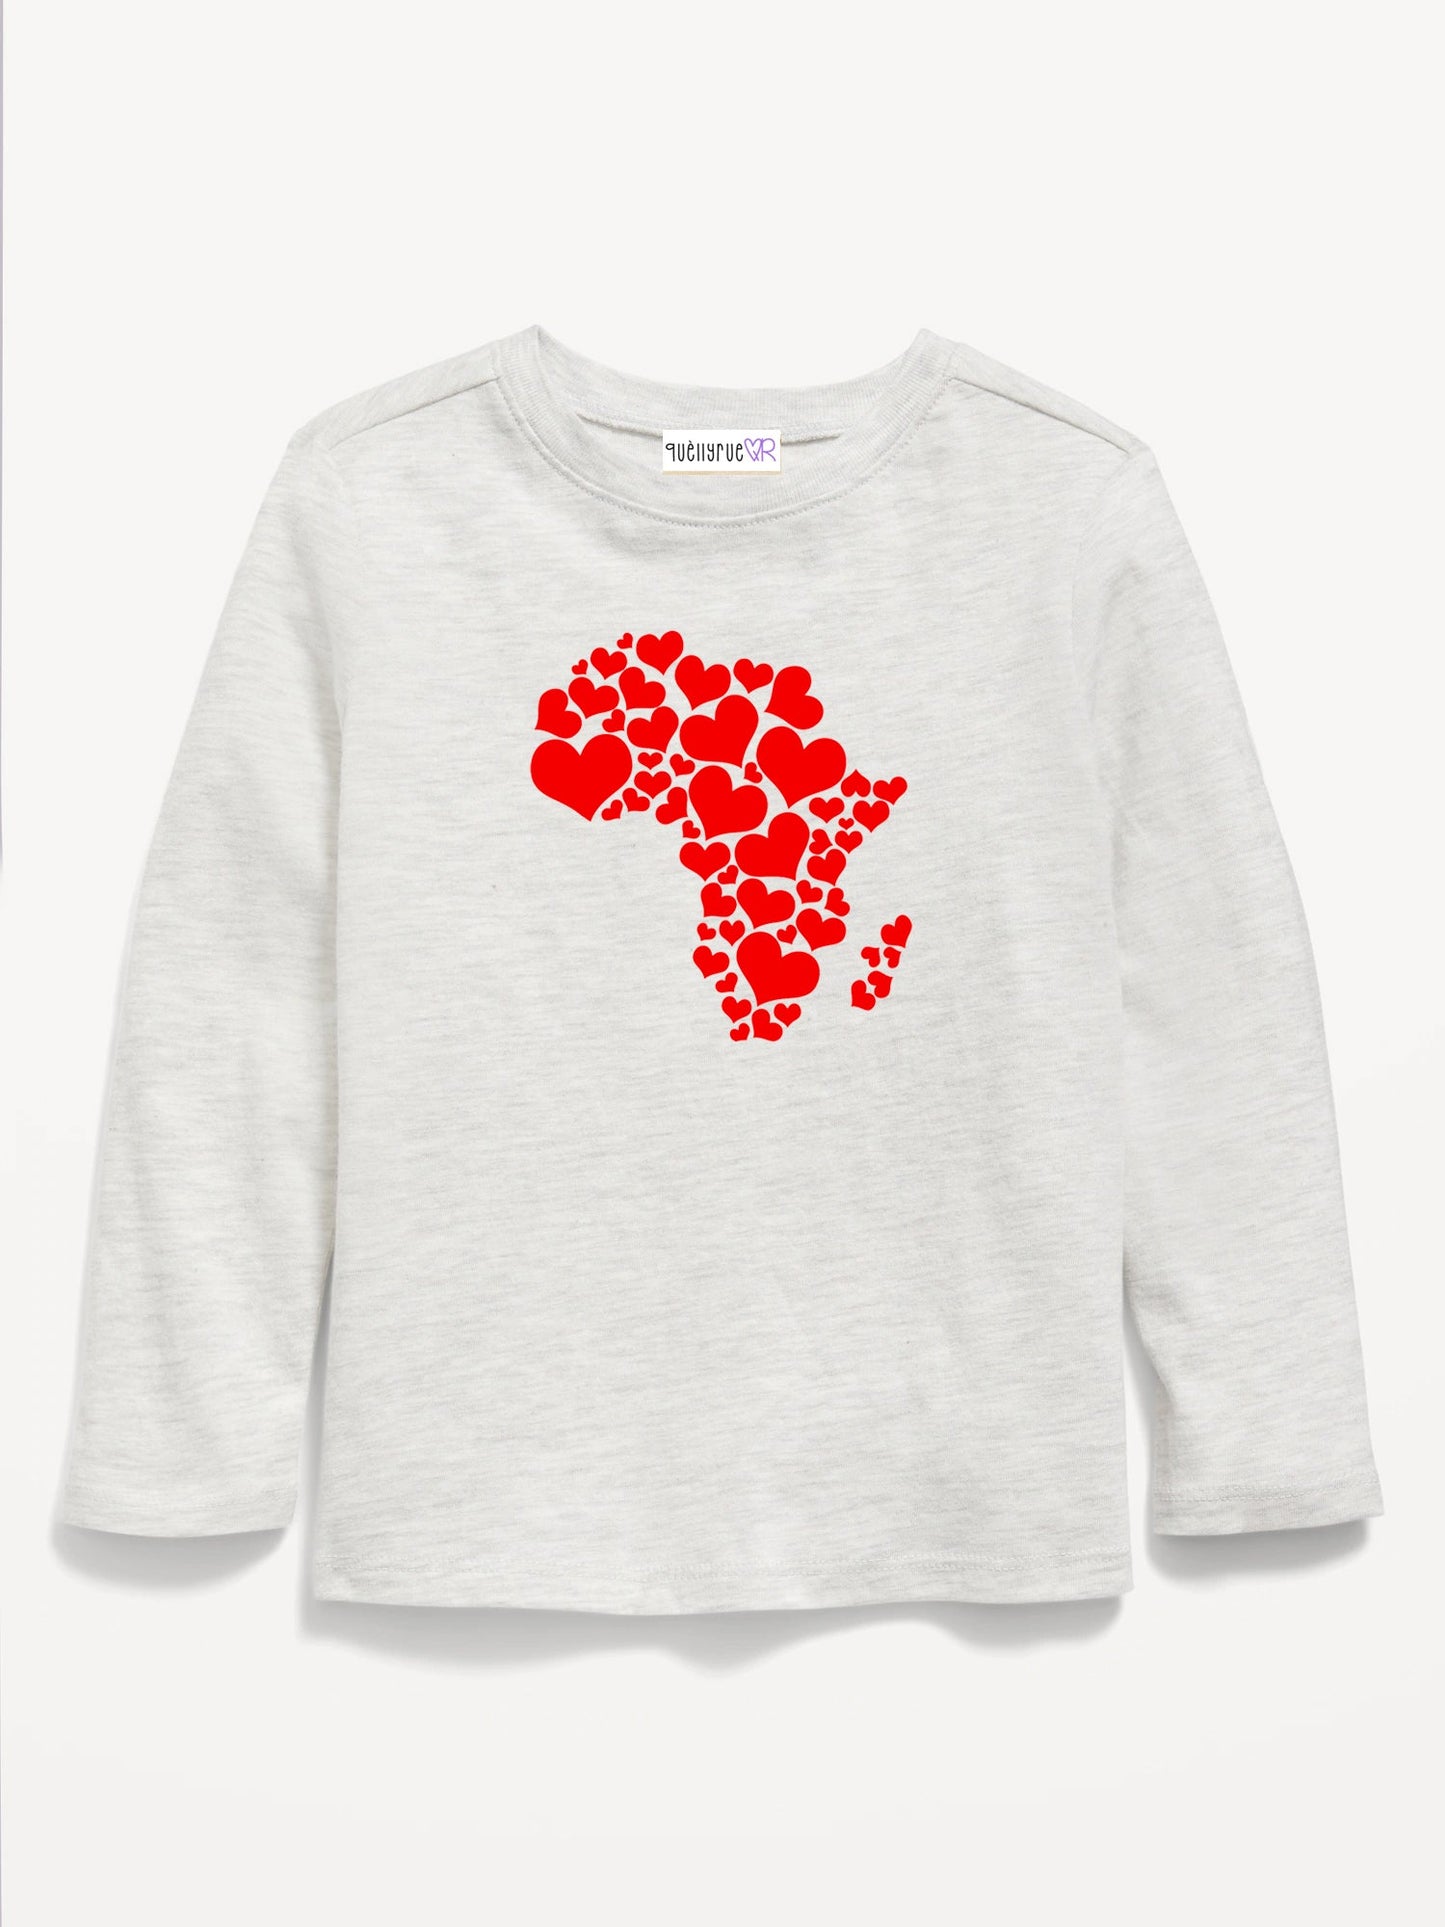 Long-Sleeve Graphic T-Shirt for Toddler